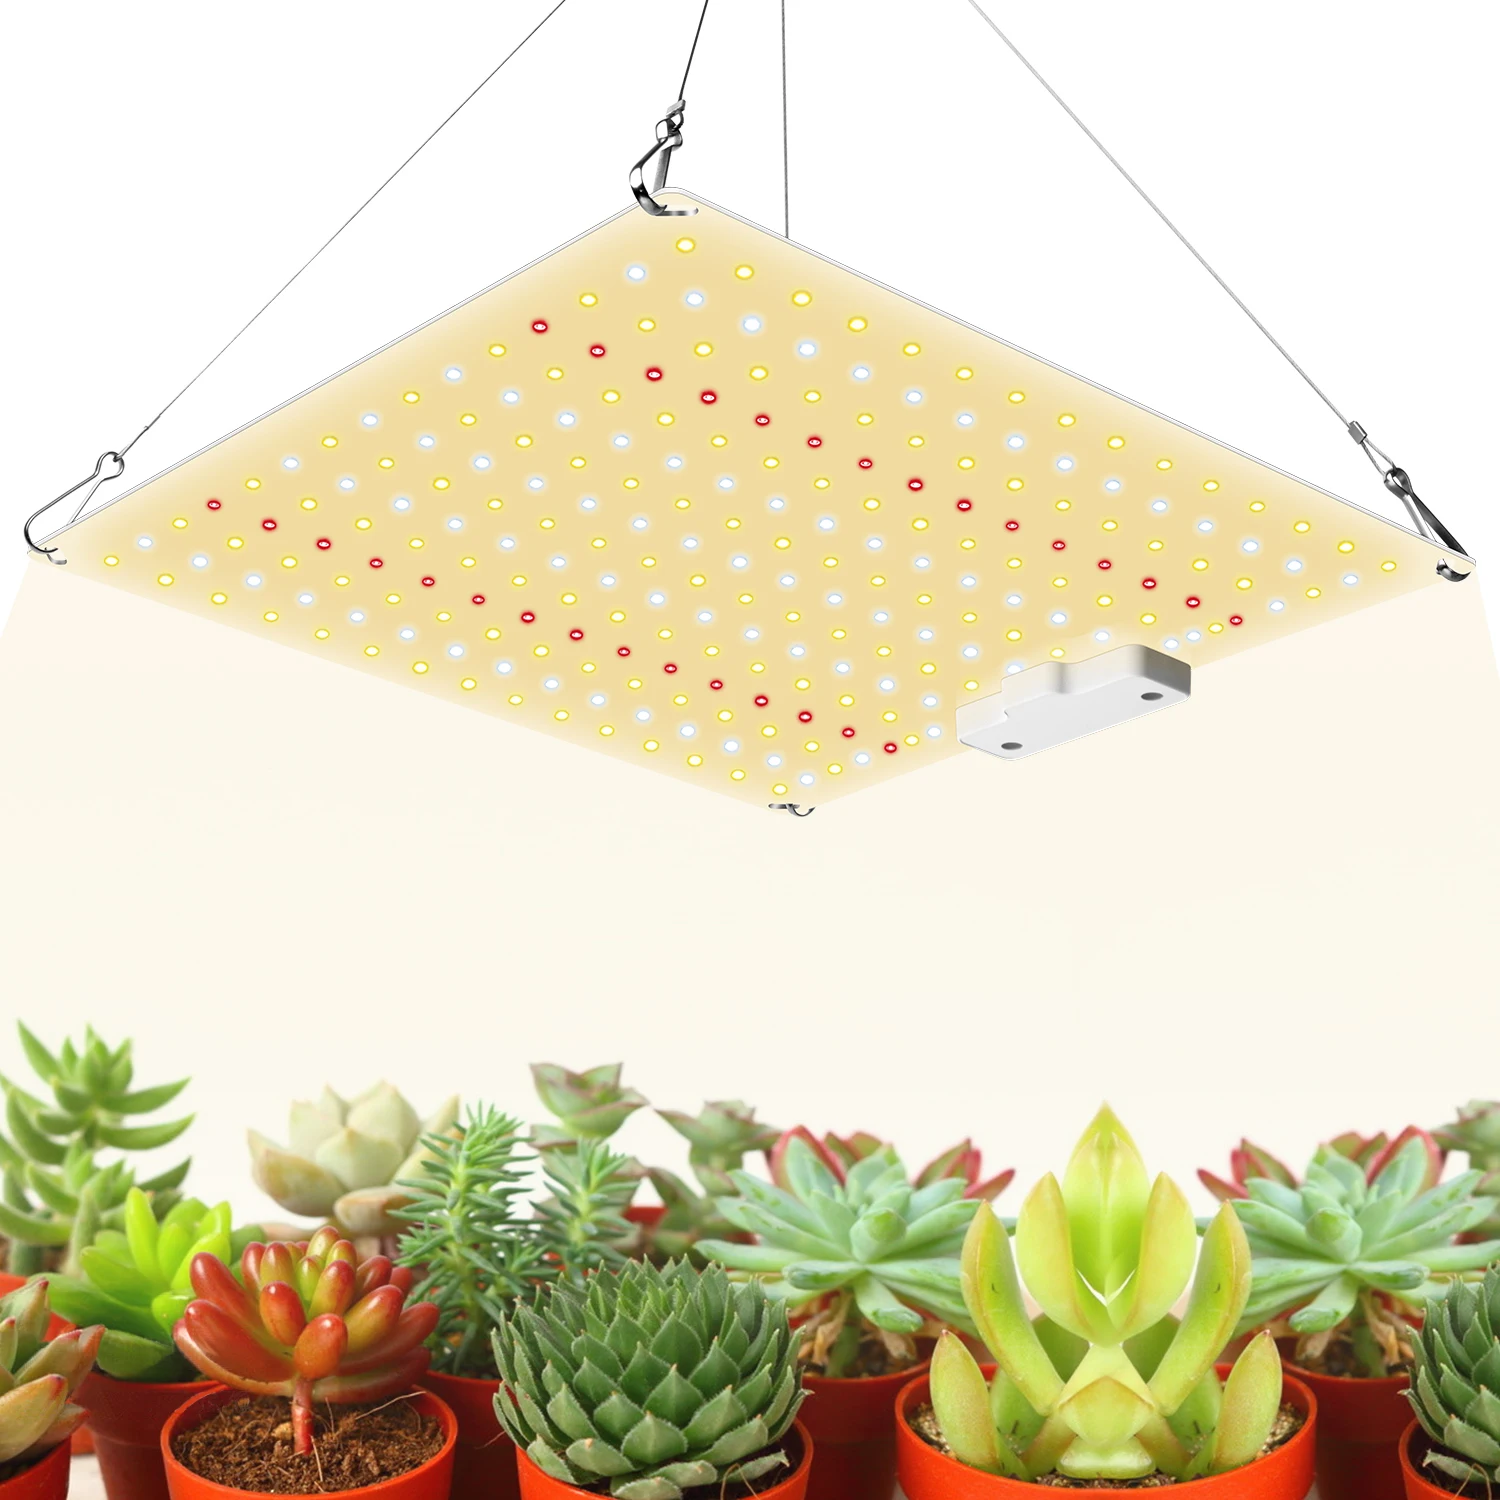 

Free Shipping Full Spectrum 600W-1000W LED Grow Light Samsung lm281b chips VEG/BLOOM switches For Indoor plants